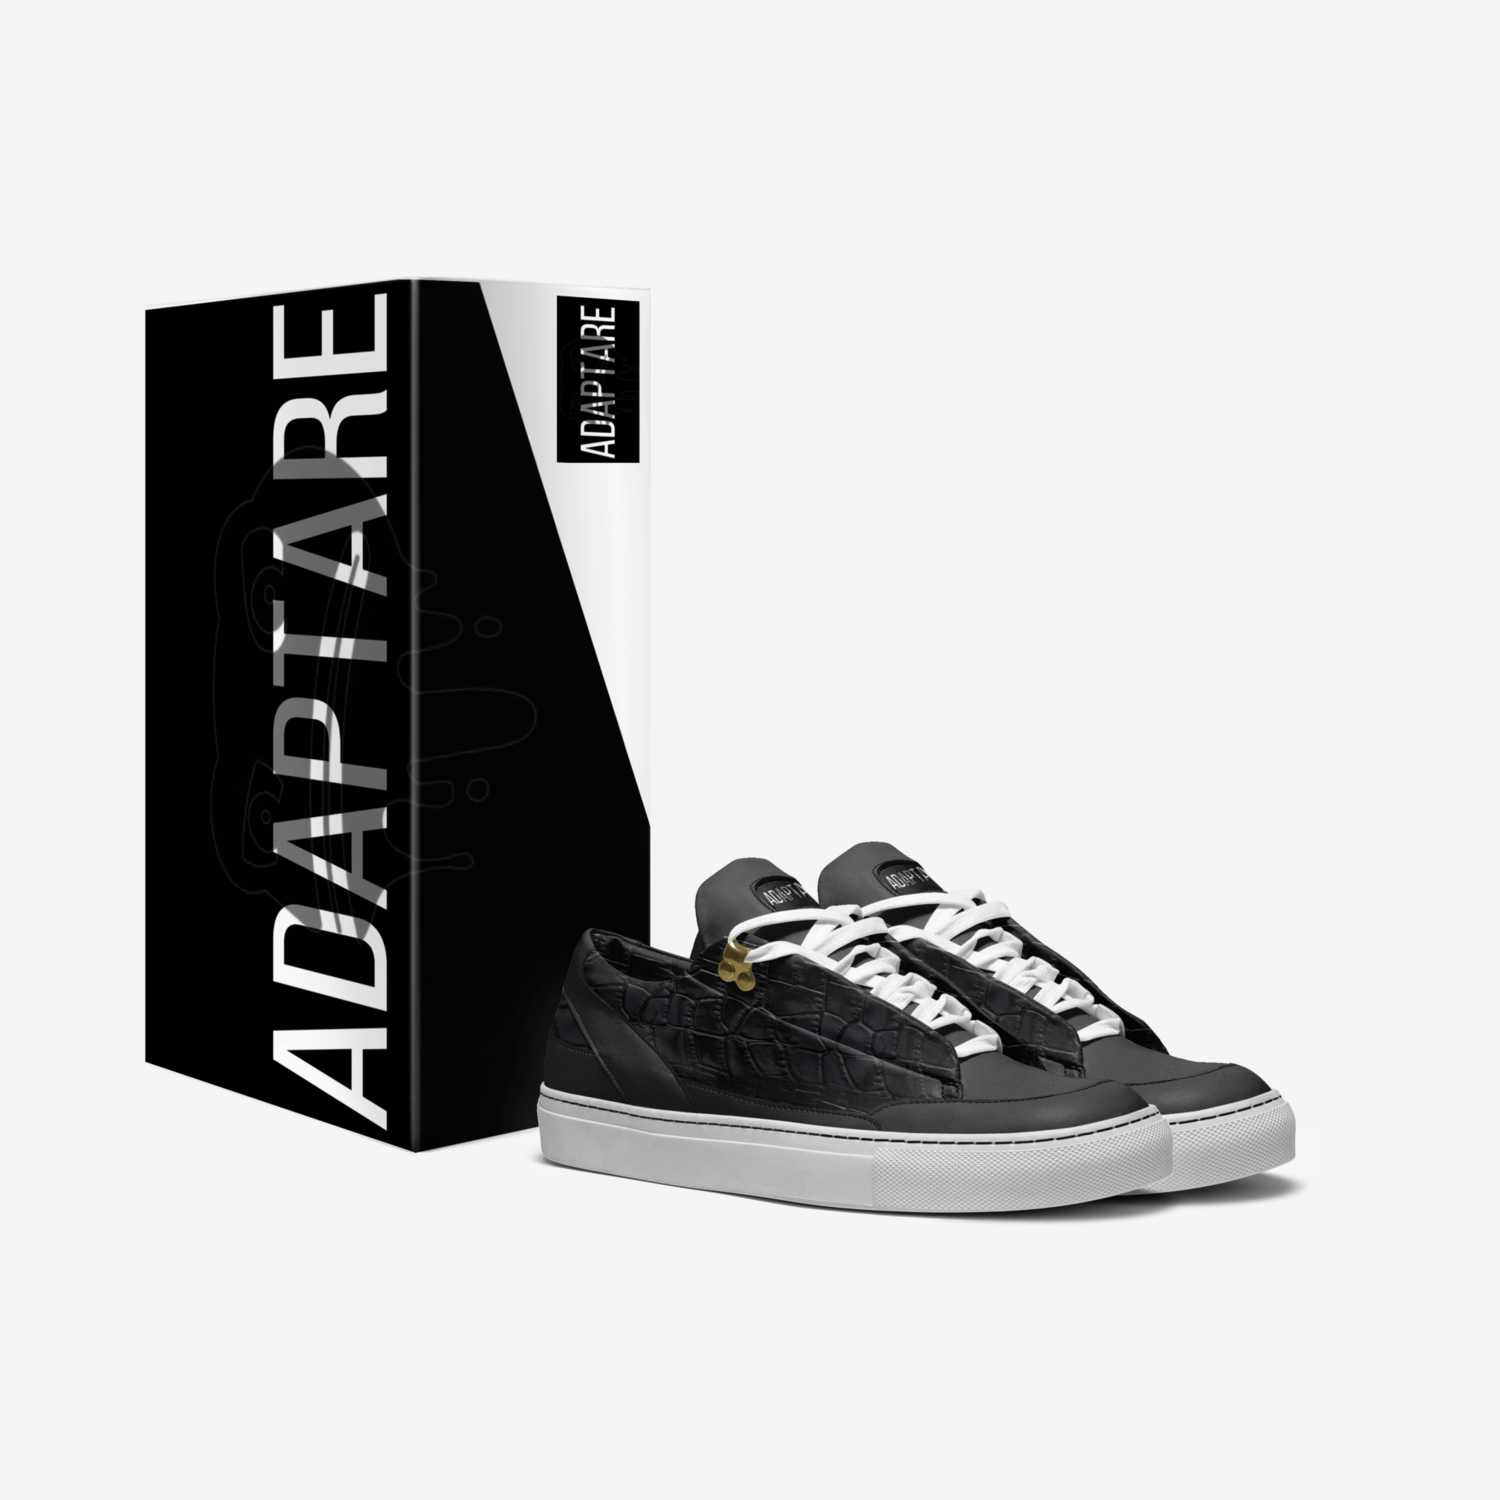 ADAPTARE (LOW) custom made in Italy shoes by Anthony Barber (tha Builder) | Box view